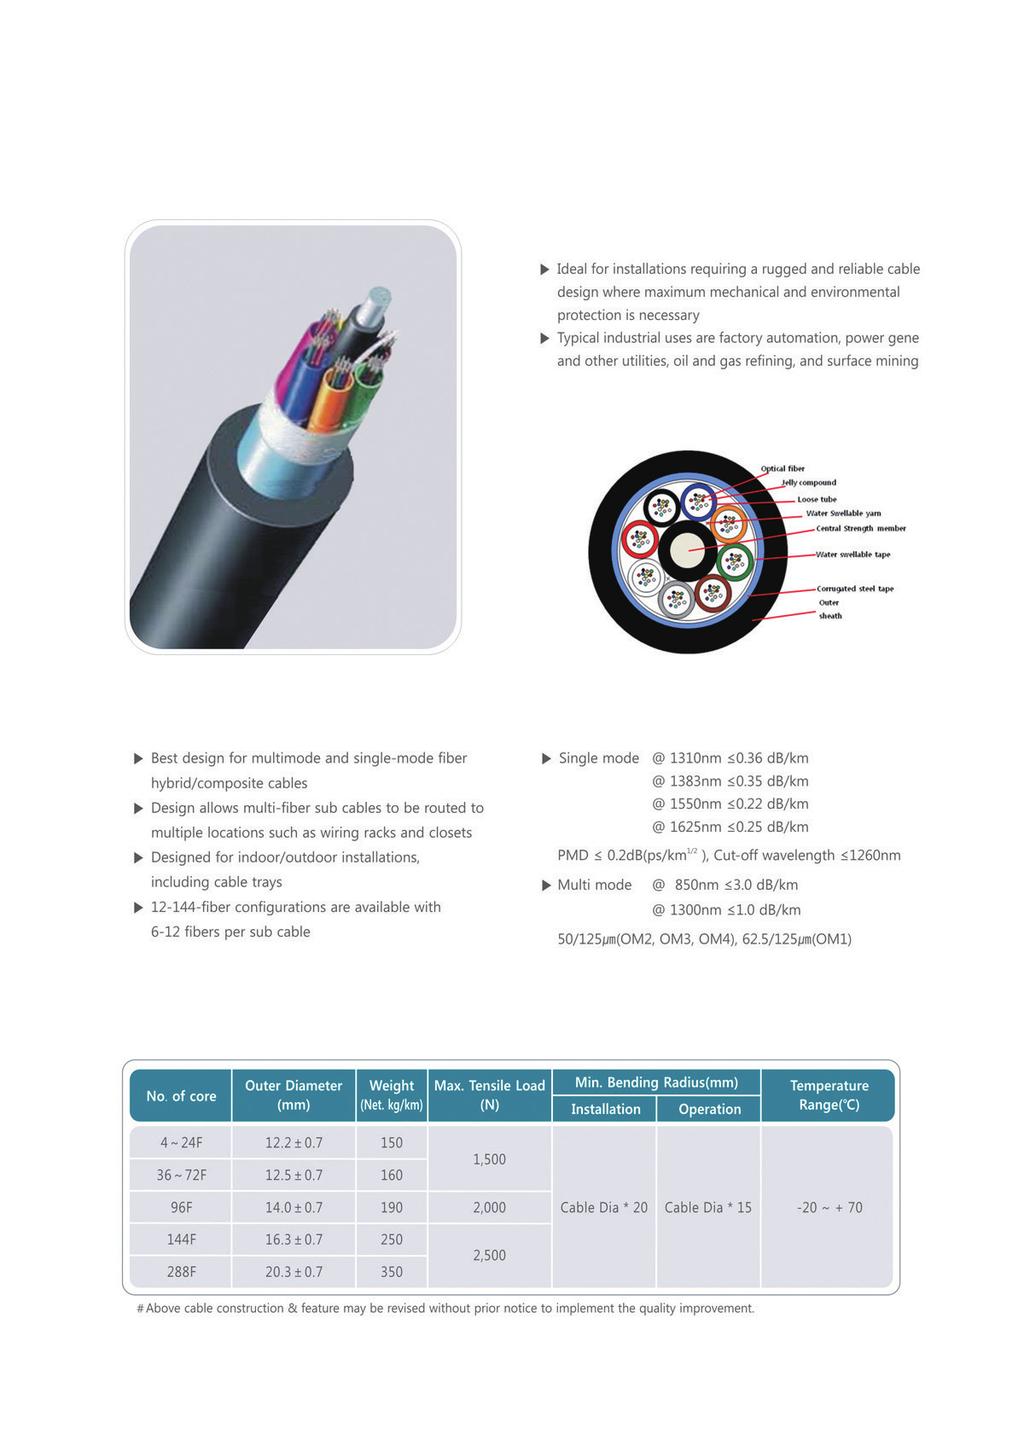 OPTICAL FIBER CABLES DUCT LOOSE TUBE CABLE (SJSA) Ideal for installations requiring a rugged and reliable cable design where maximum mechanical and environmental protection is necessary Typical